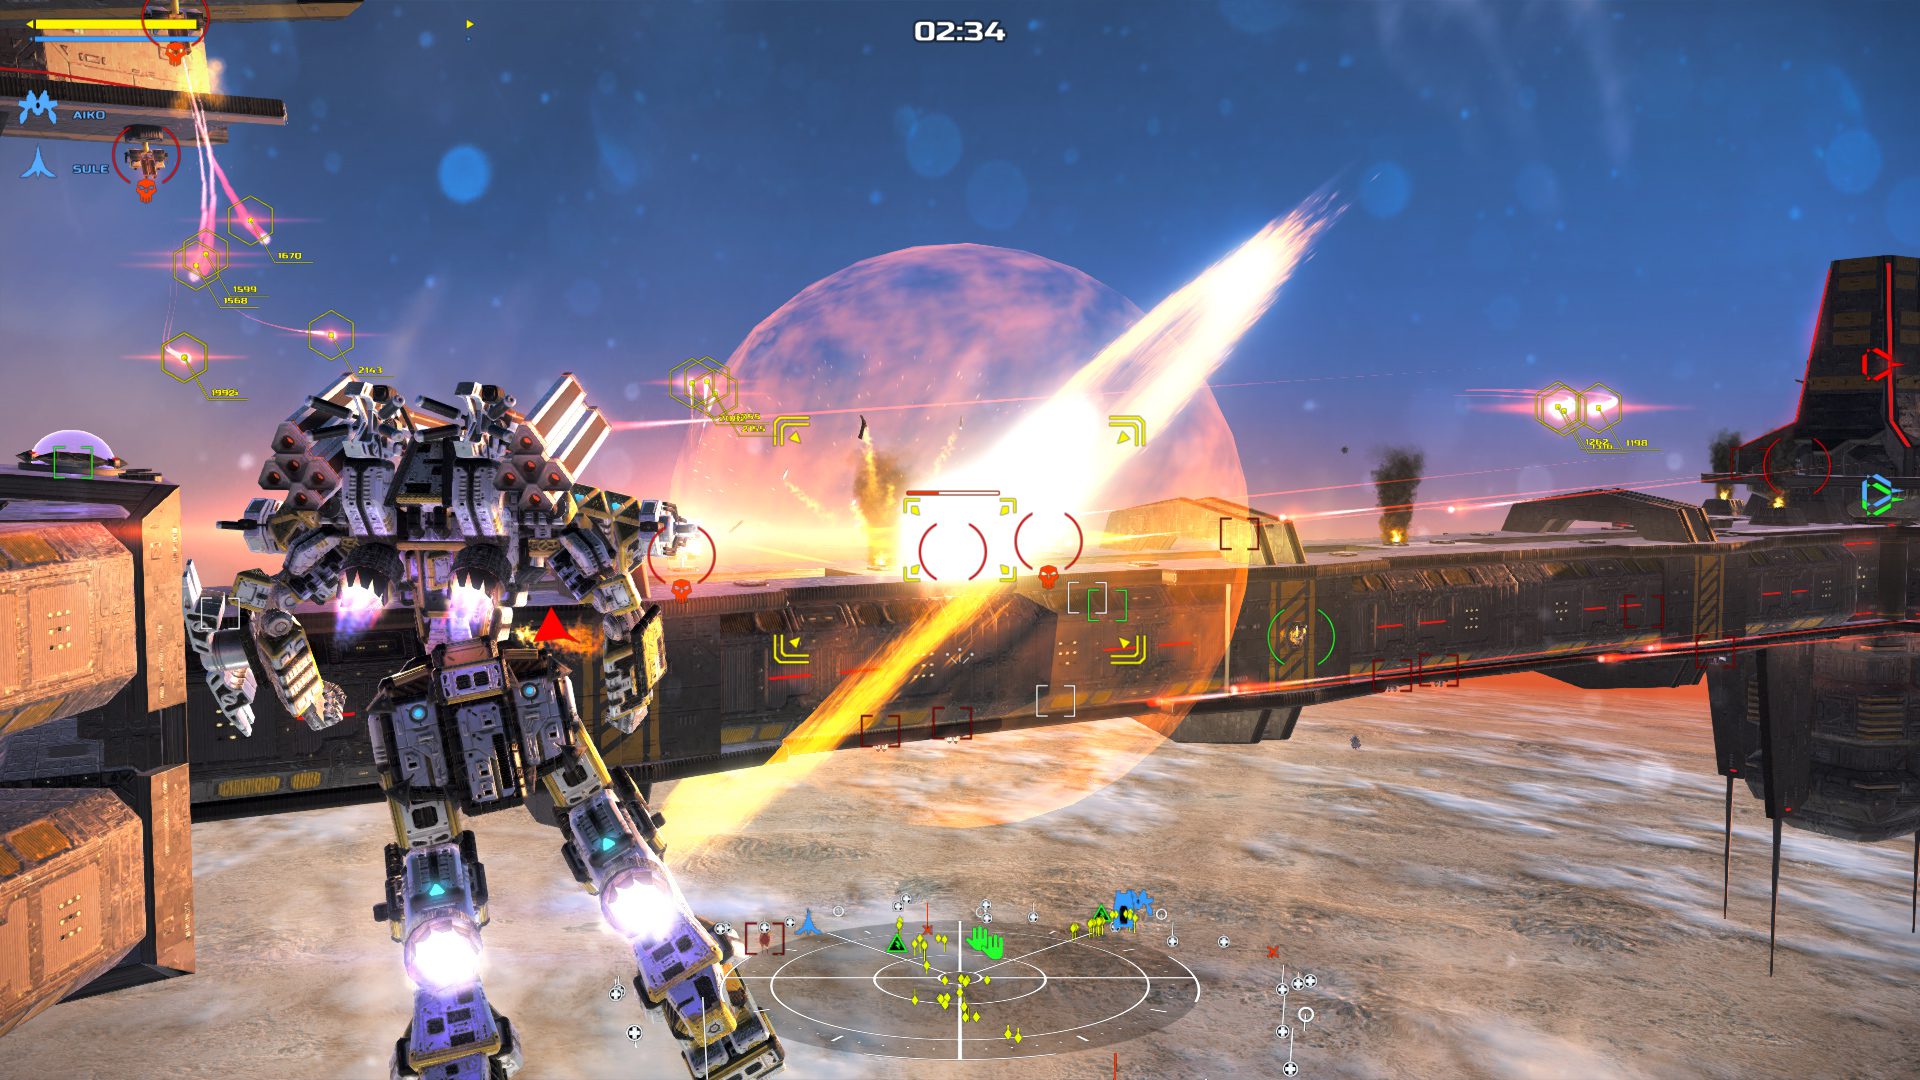 Mech game ‘War Tech Fighters’ hits Steam July 25th